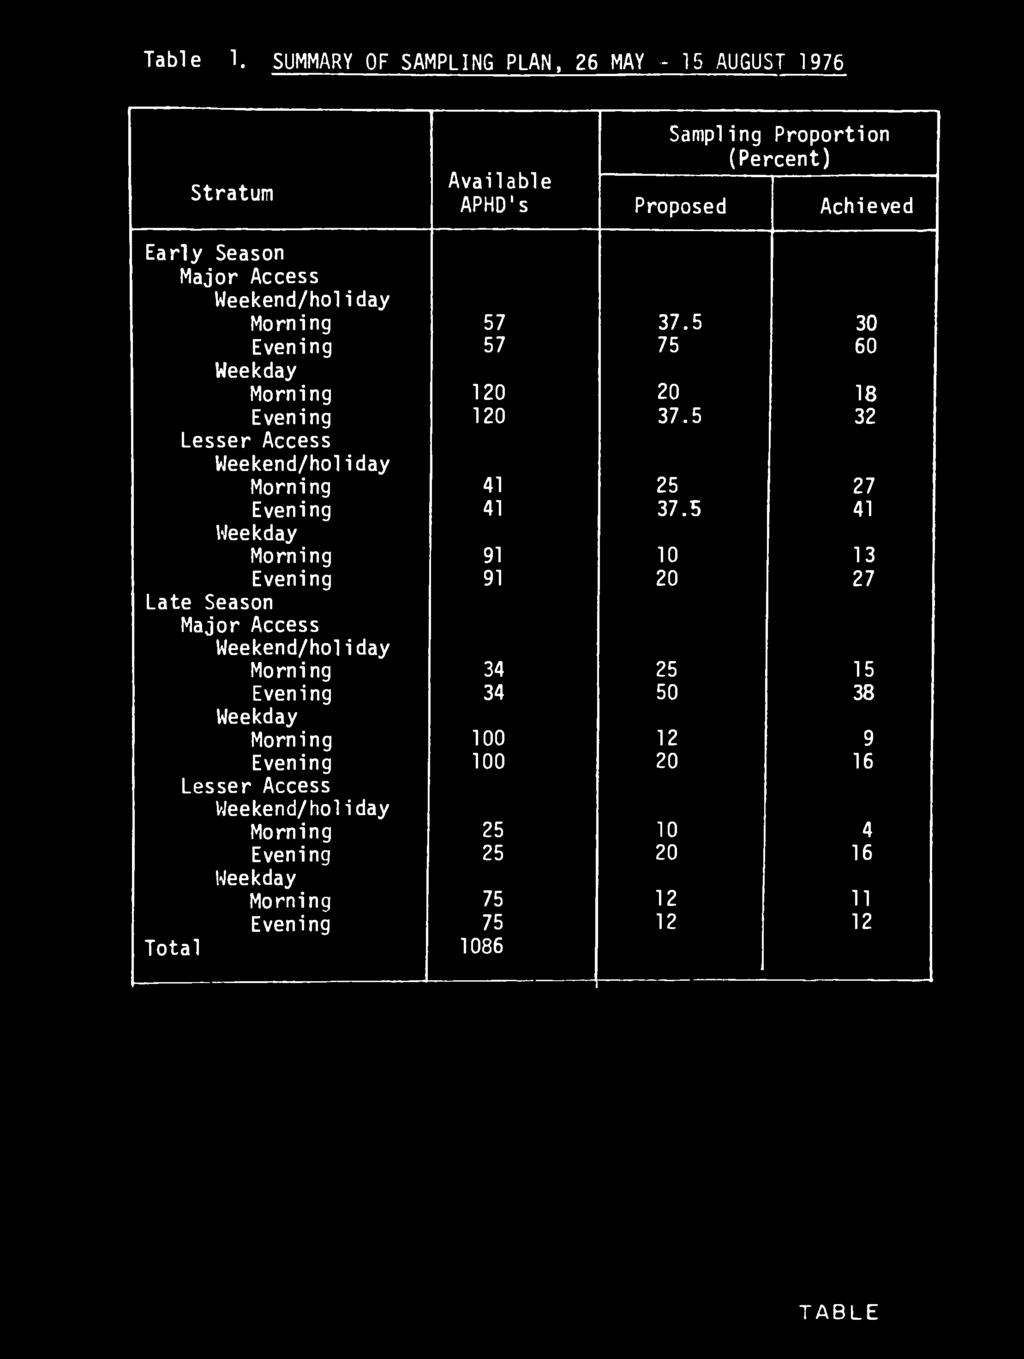 Table 1. SUMMARY OF SAMPLING PLAN, 26 MAY - 15 AUGUST 1976 Stratum Sampling Proportion (Percent) Available APHD's Proposed Achieved Early Season Major Access Weekend/holiday Morning 57 37.